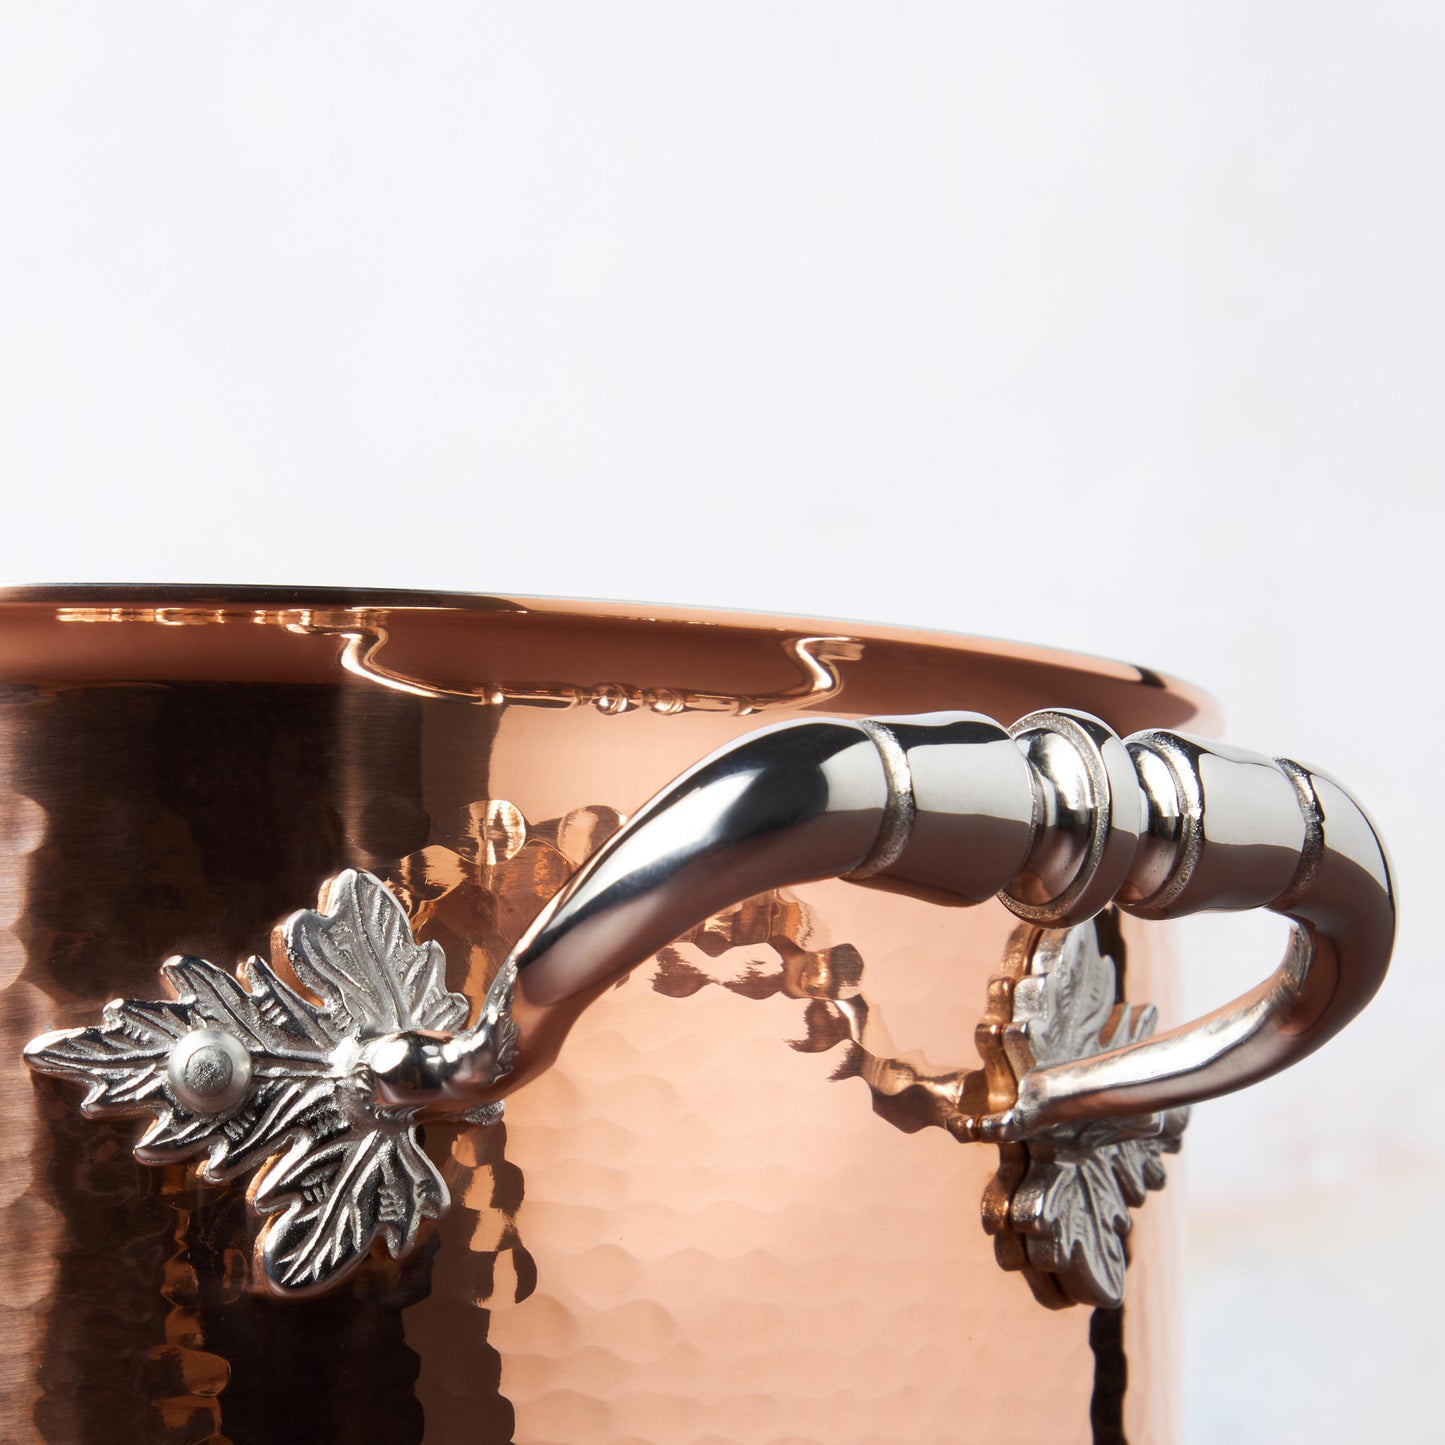 Beautiful stainless steel helper handle decorated with delicate leaves on Opus Cupra cookware by Ruffoni